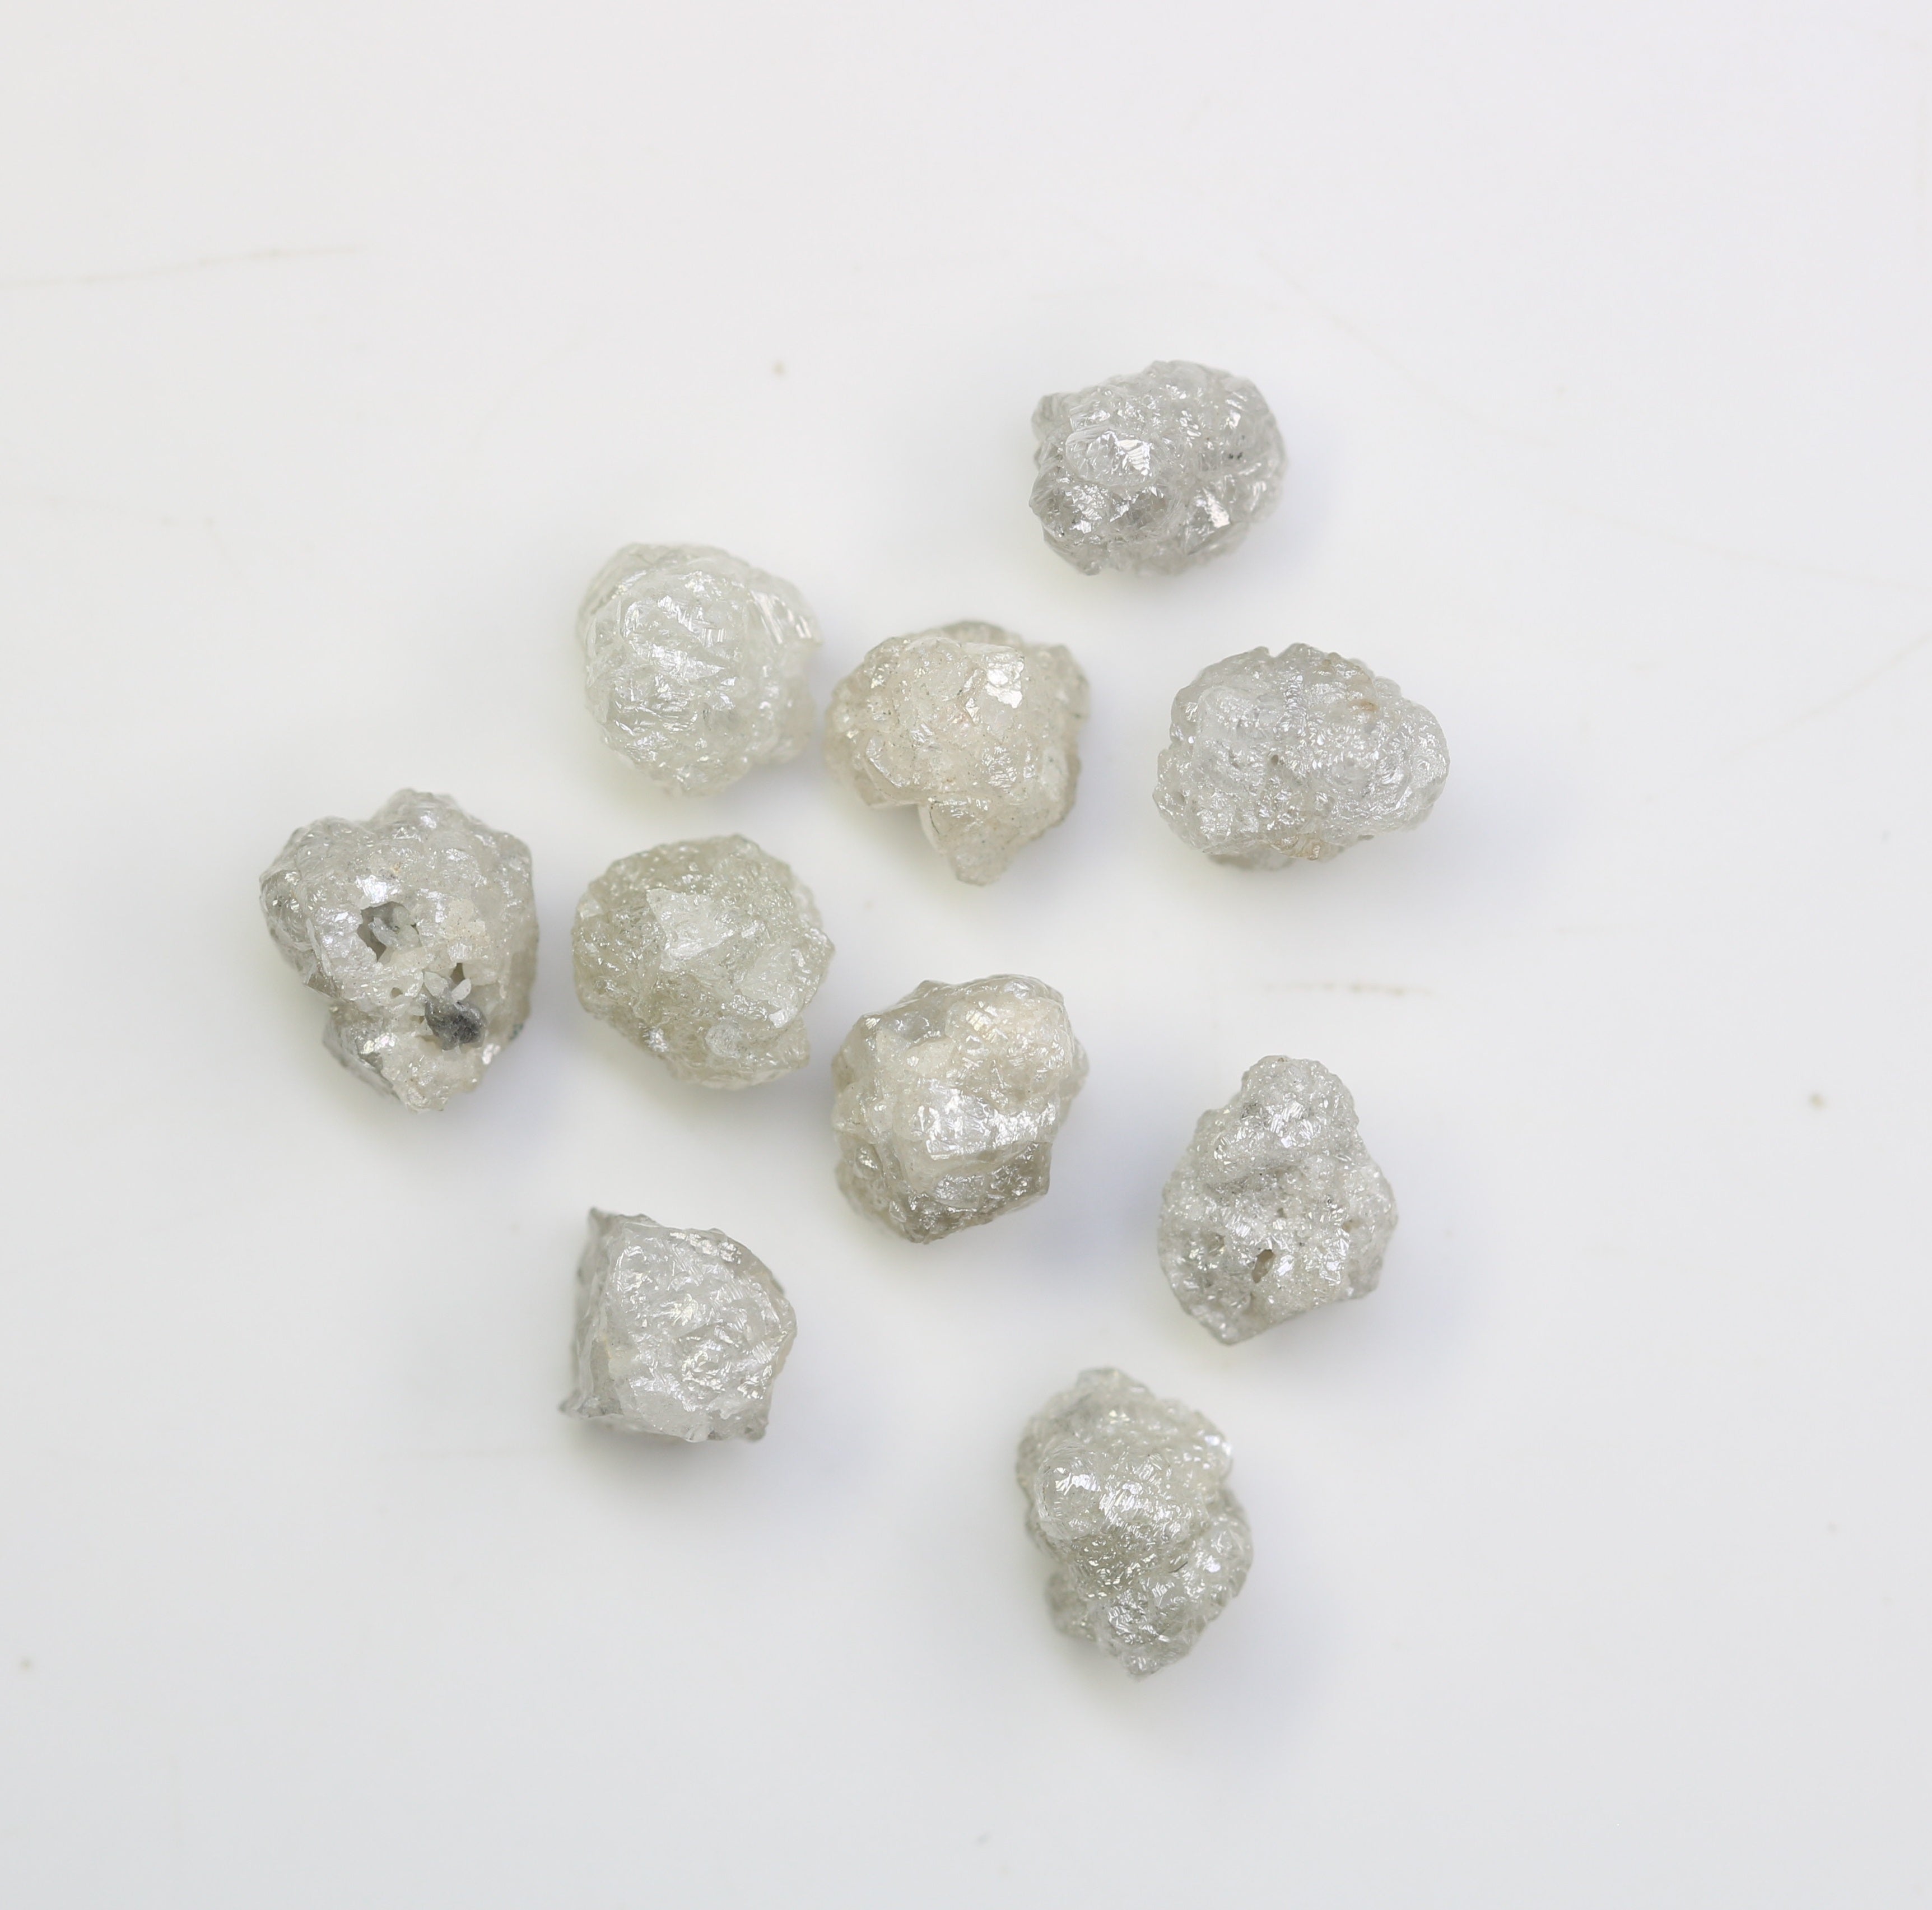 5.59 CT Grey Rough Uncut Raw Diamond For Engagement Ring